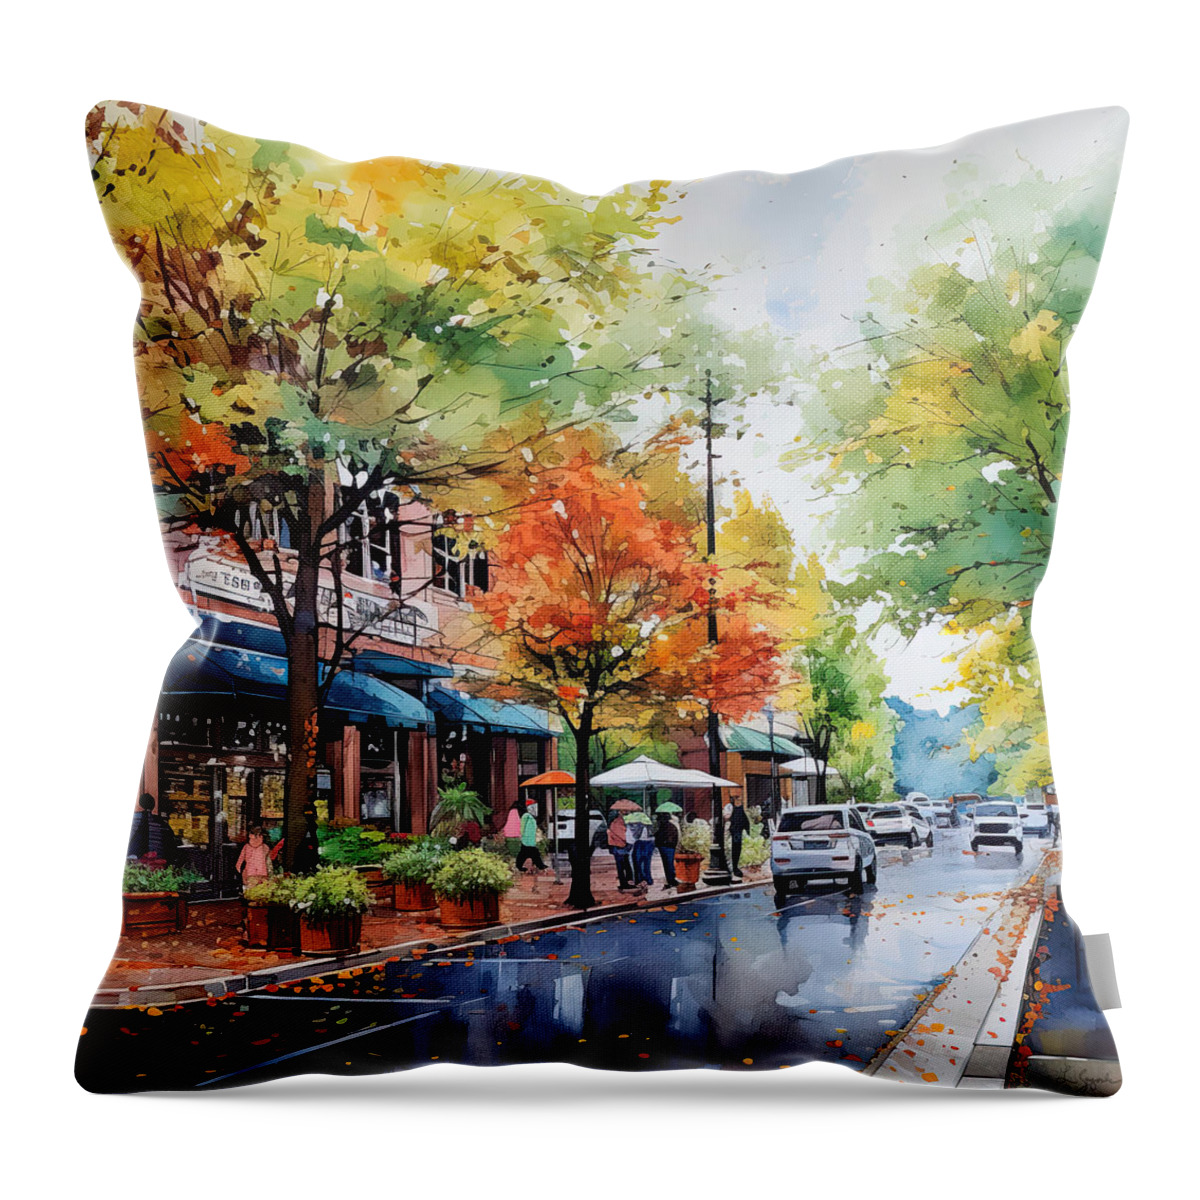 Hot Springs Arkansas Throw Pillow featuring the painting Hot Springs Scenic Downtown in Autumn by Lourry Legarde